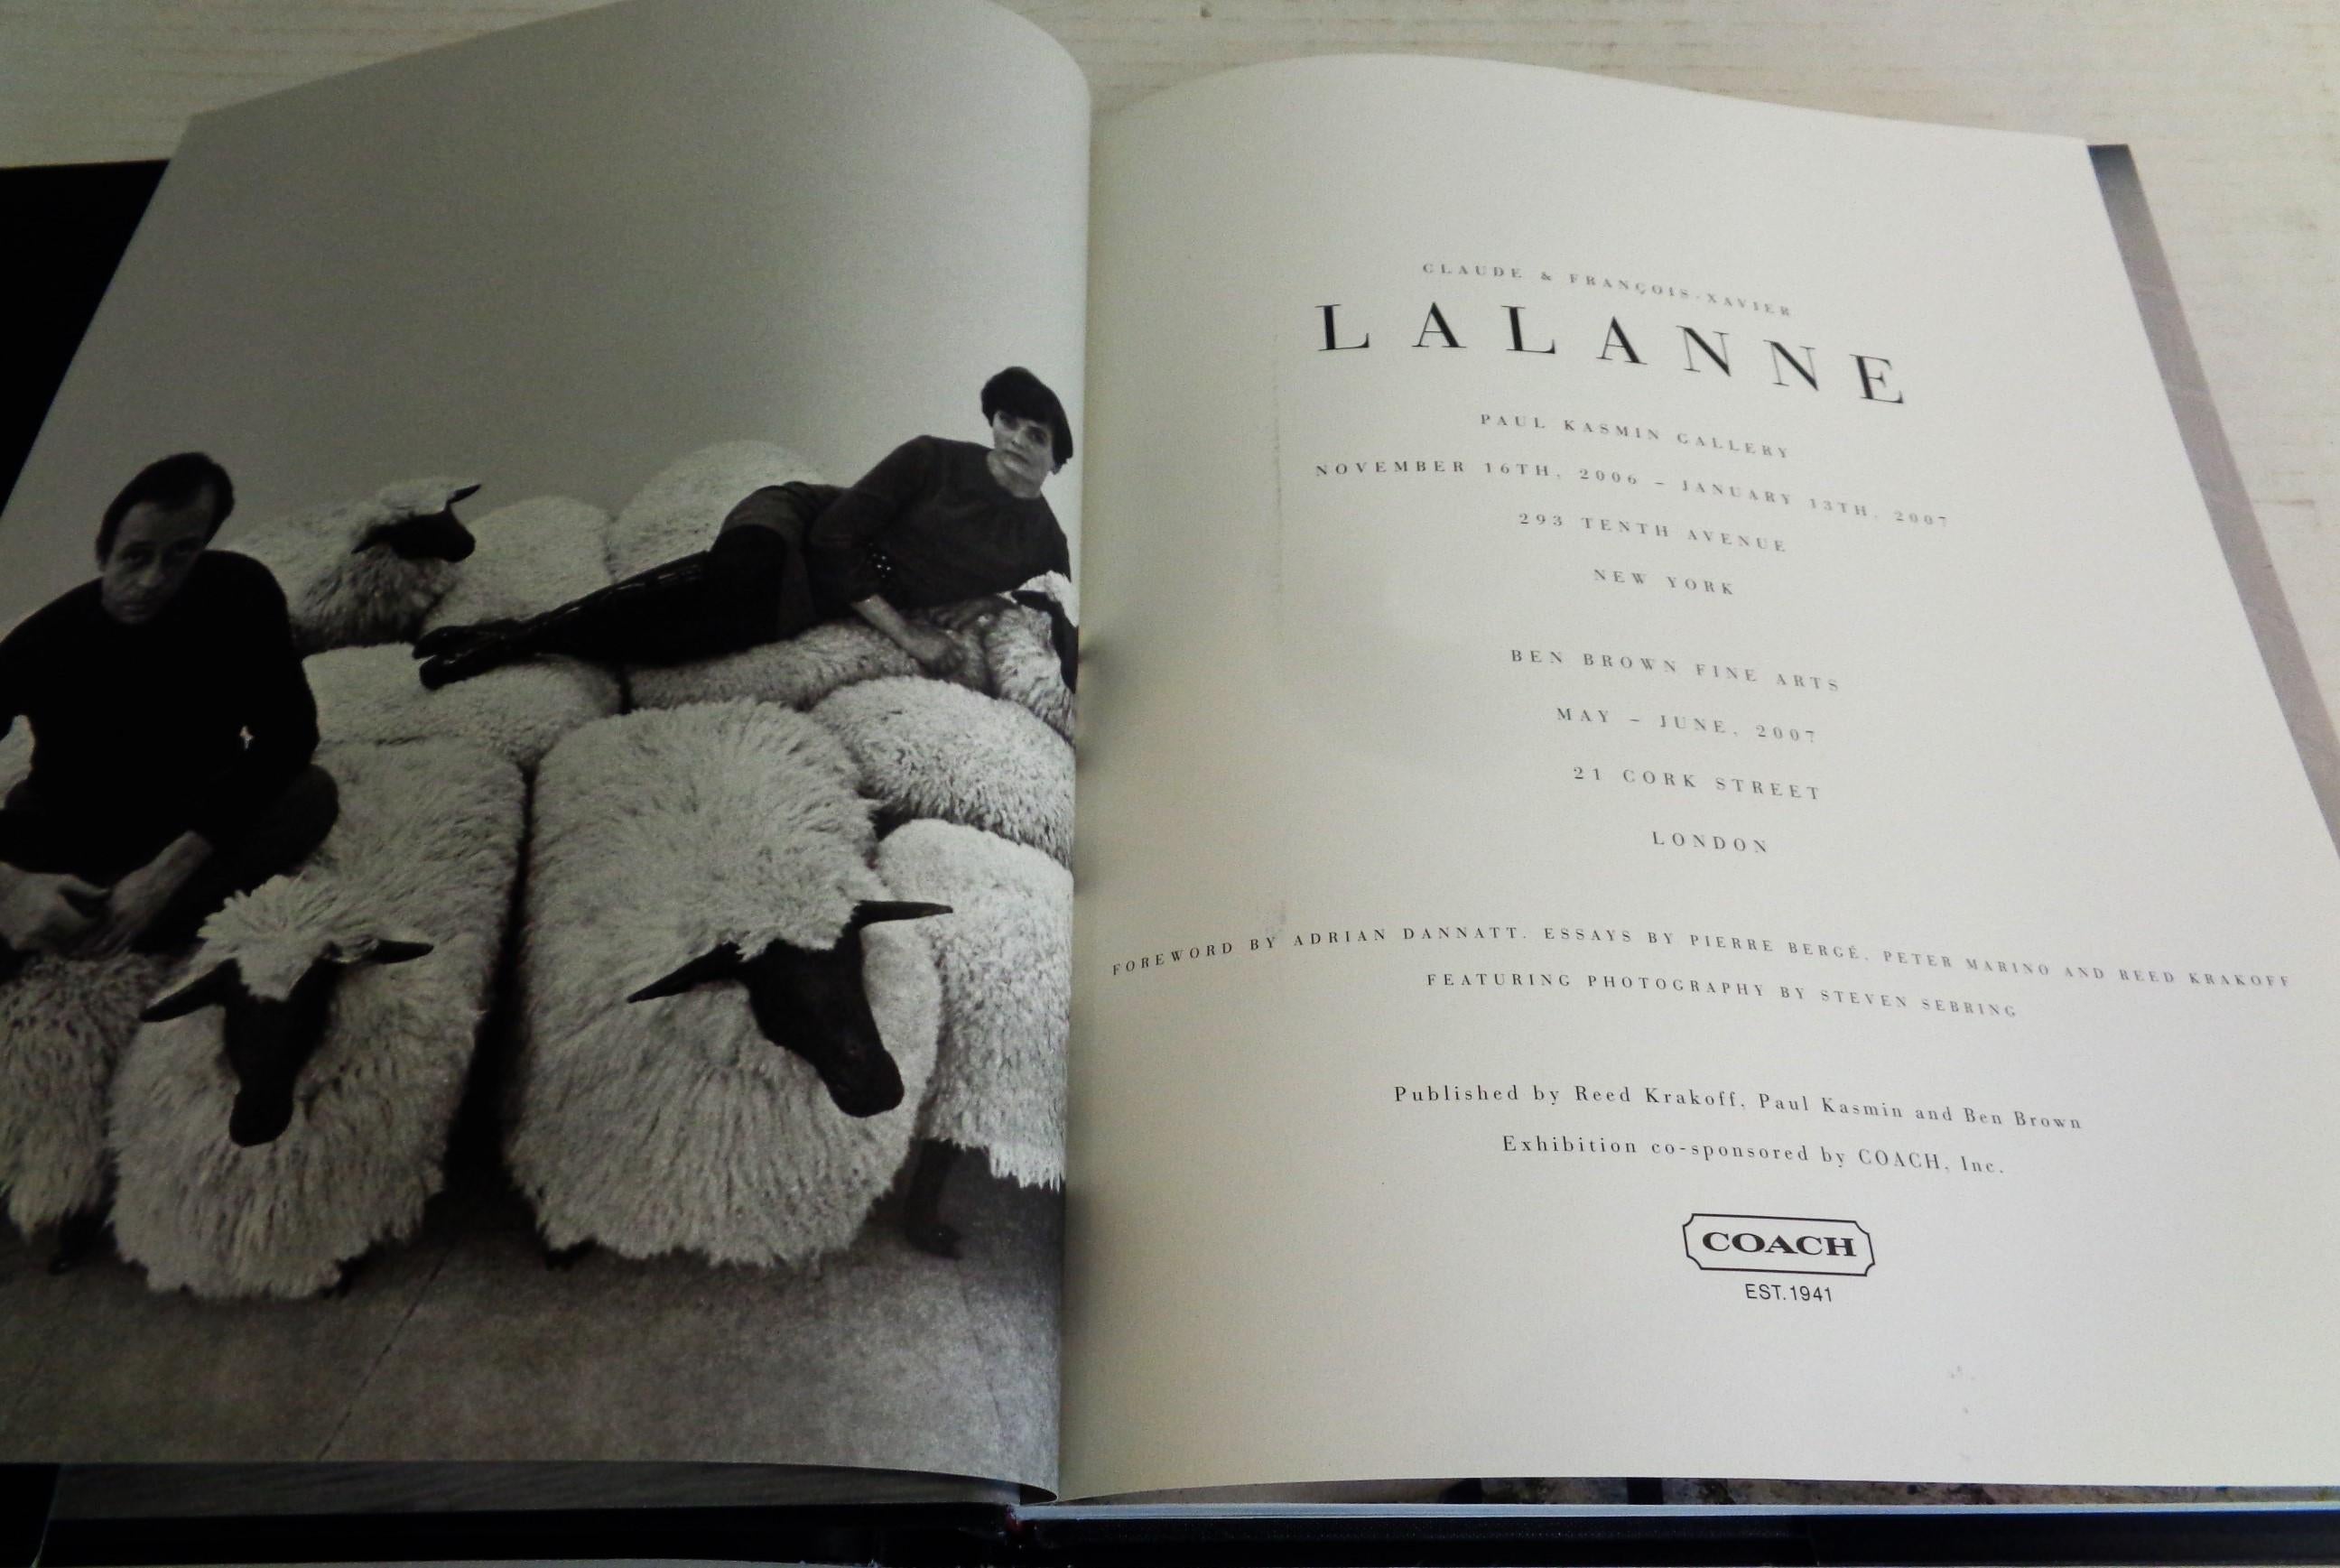 Contemporary Claude & Francoise - Xavier Lalanne: 2006 Krakoff, Kasmin, Brown - 1st Edition  For Sale